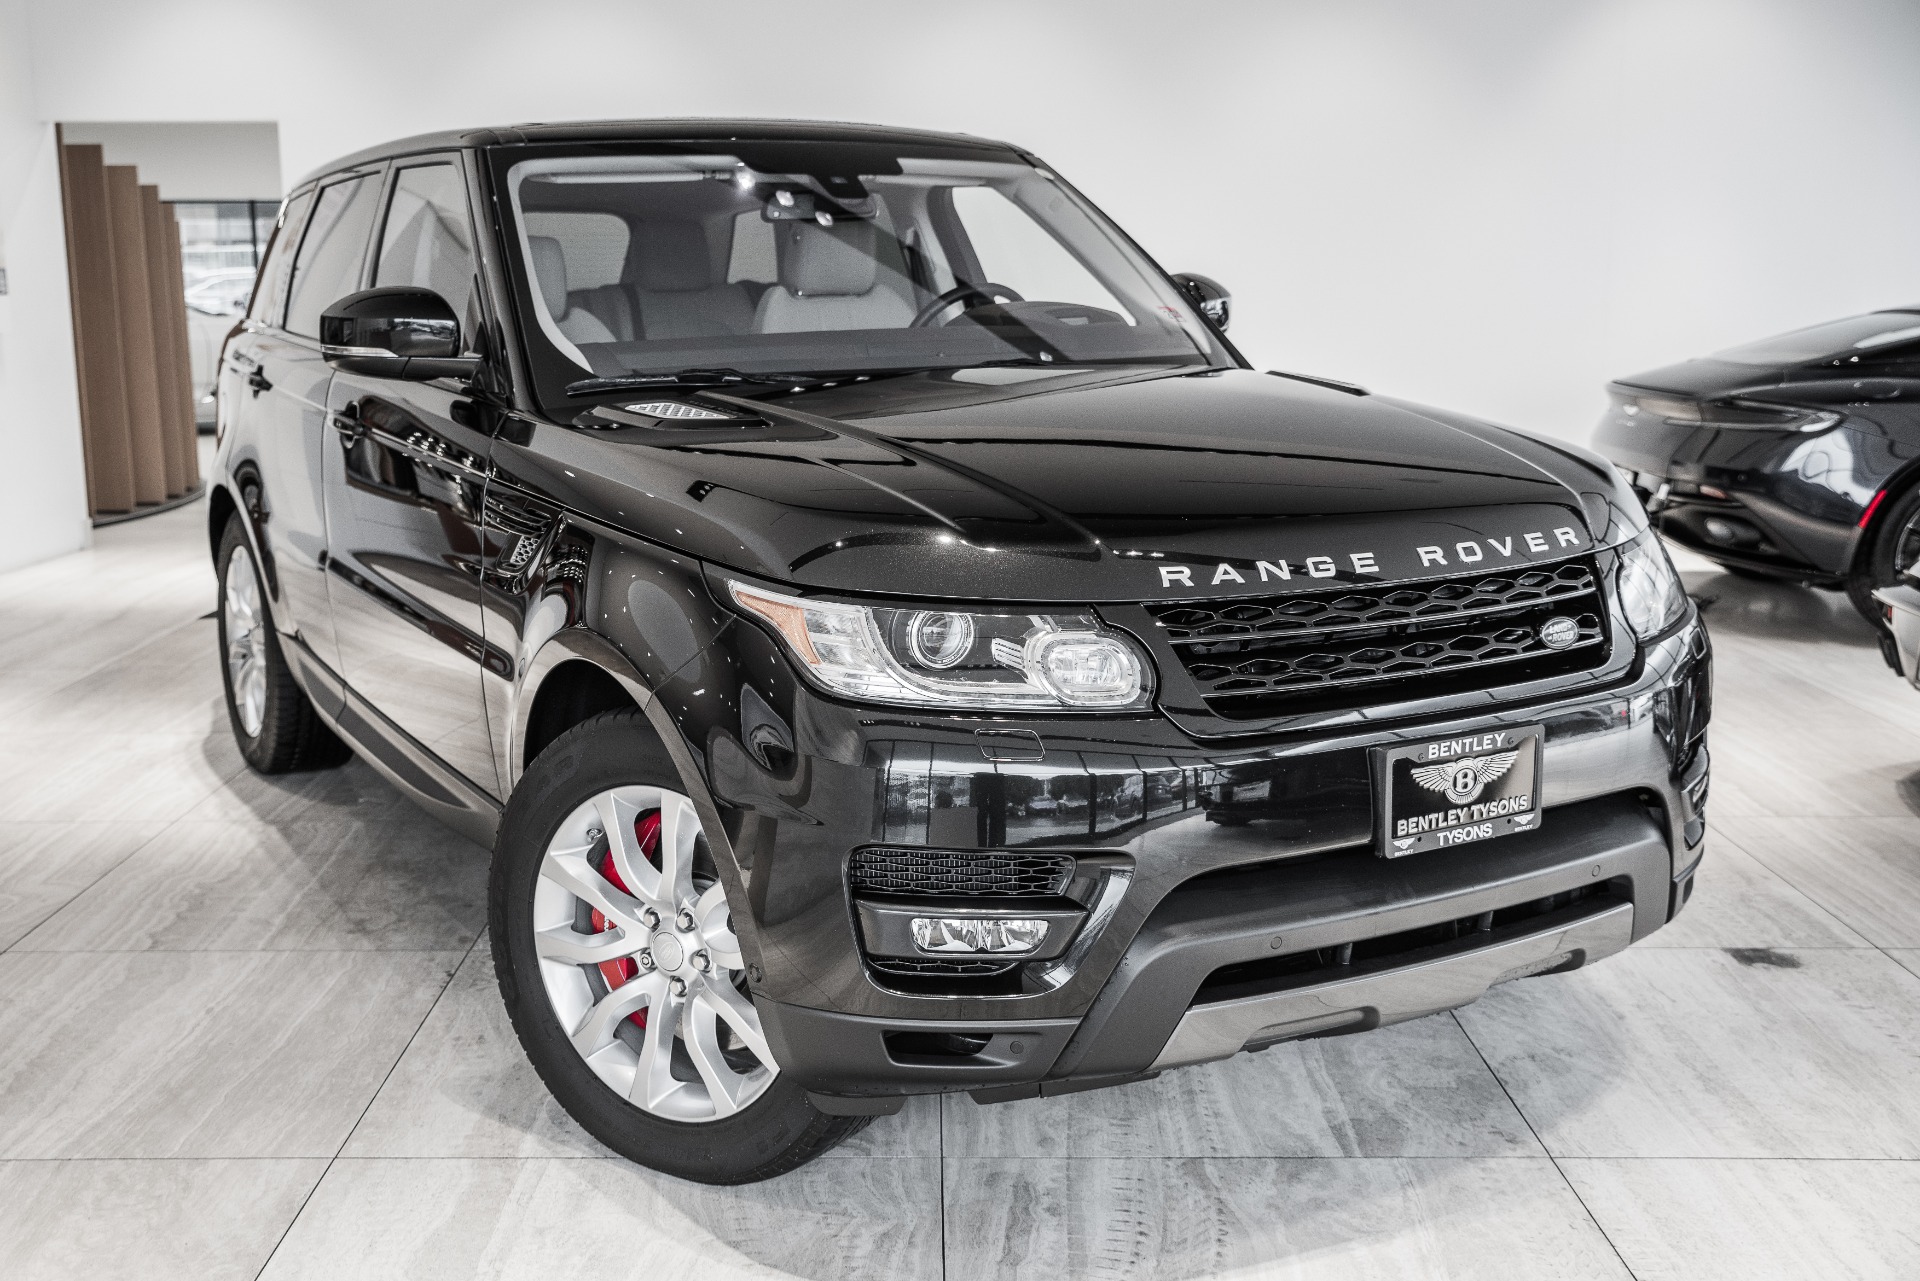 2016 Land Rover Range Rover Sport Stock # P589225 for sale ...